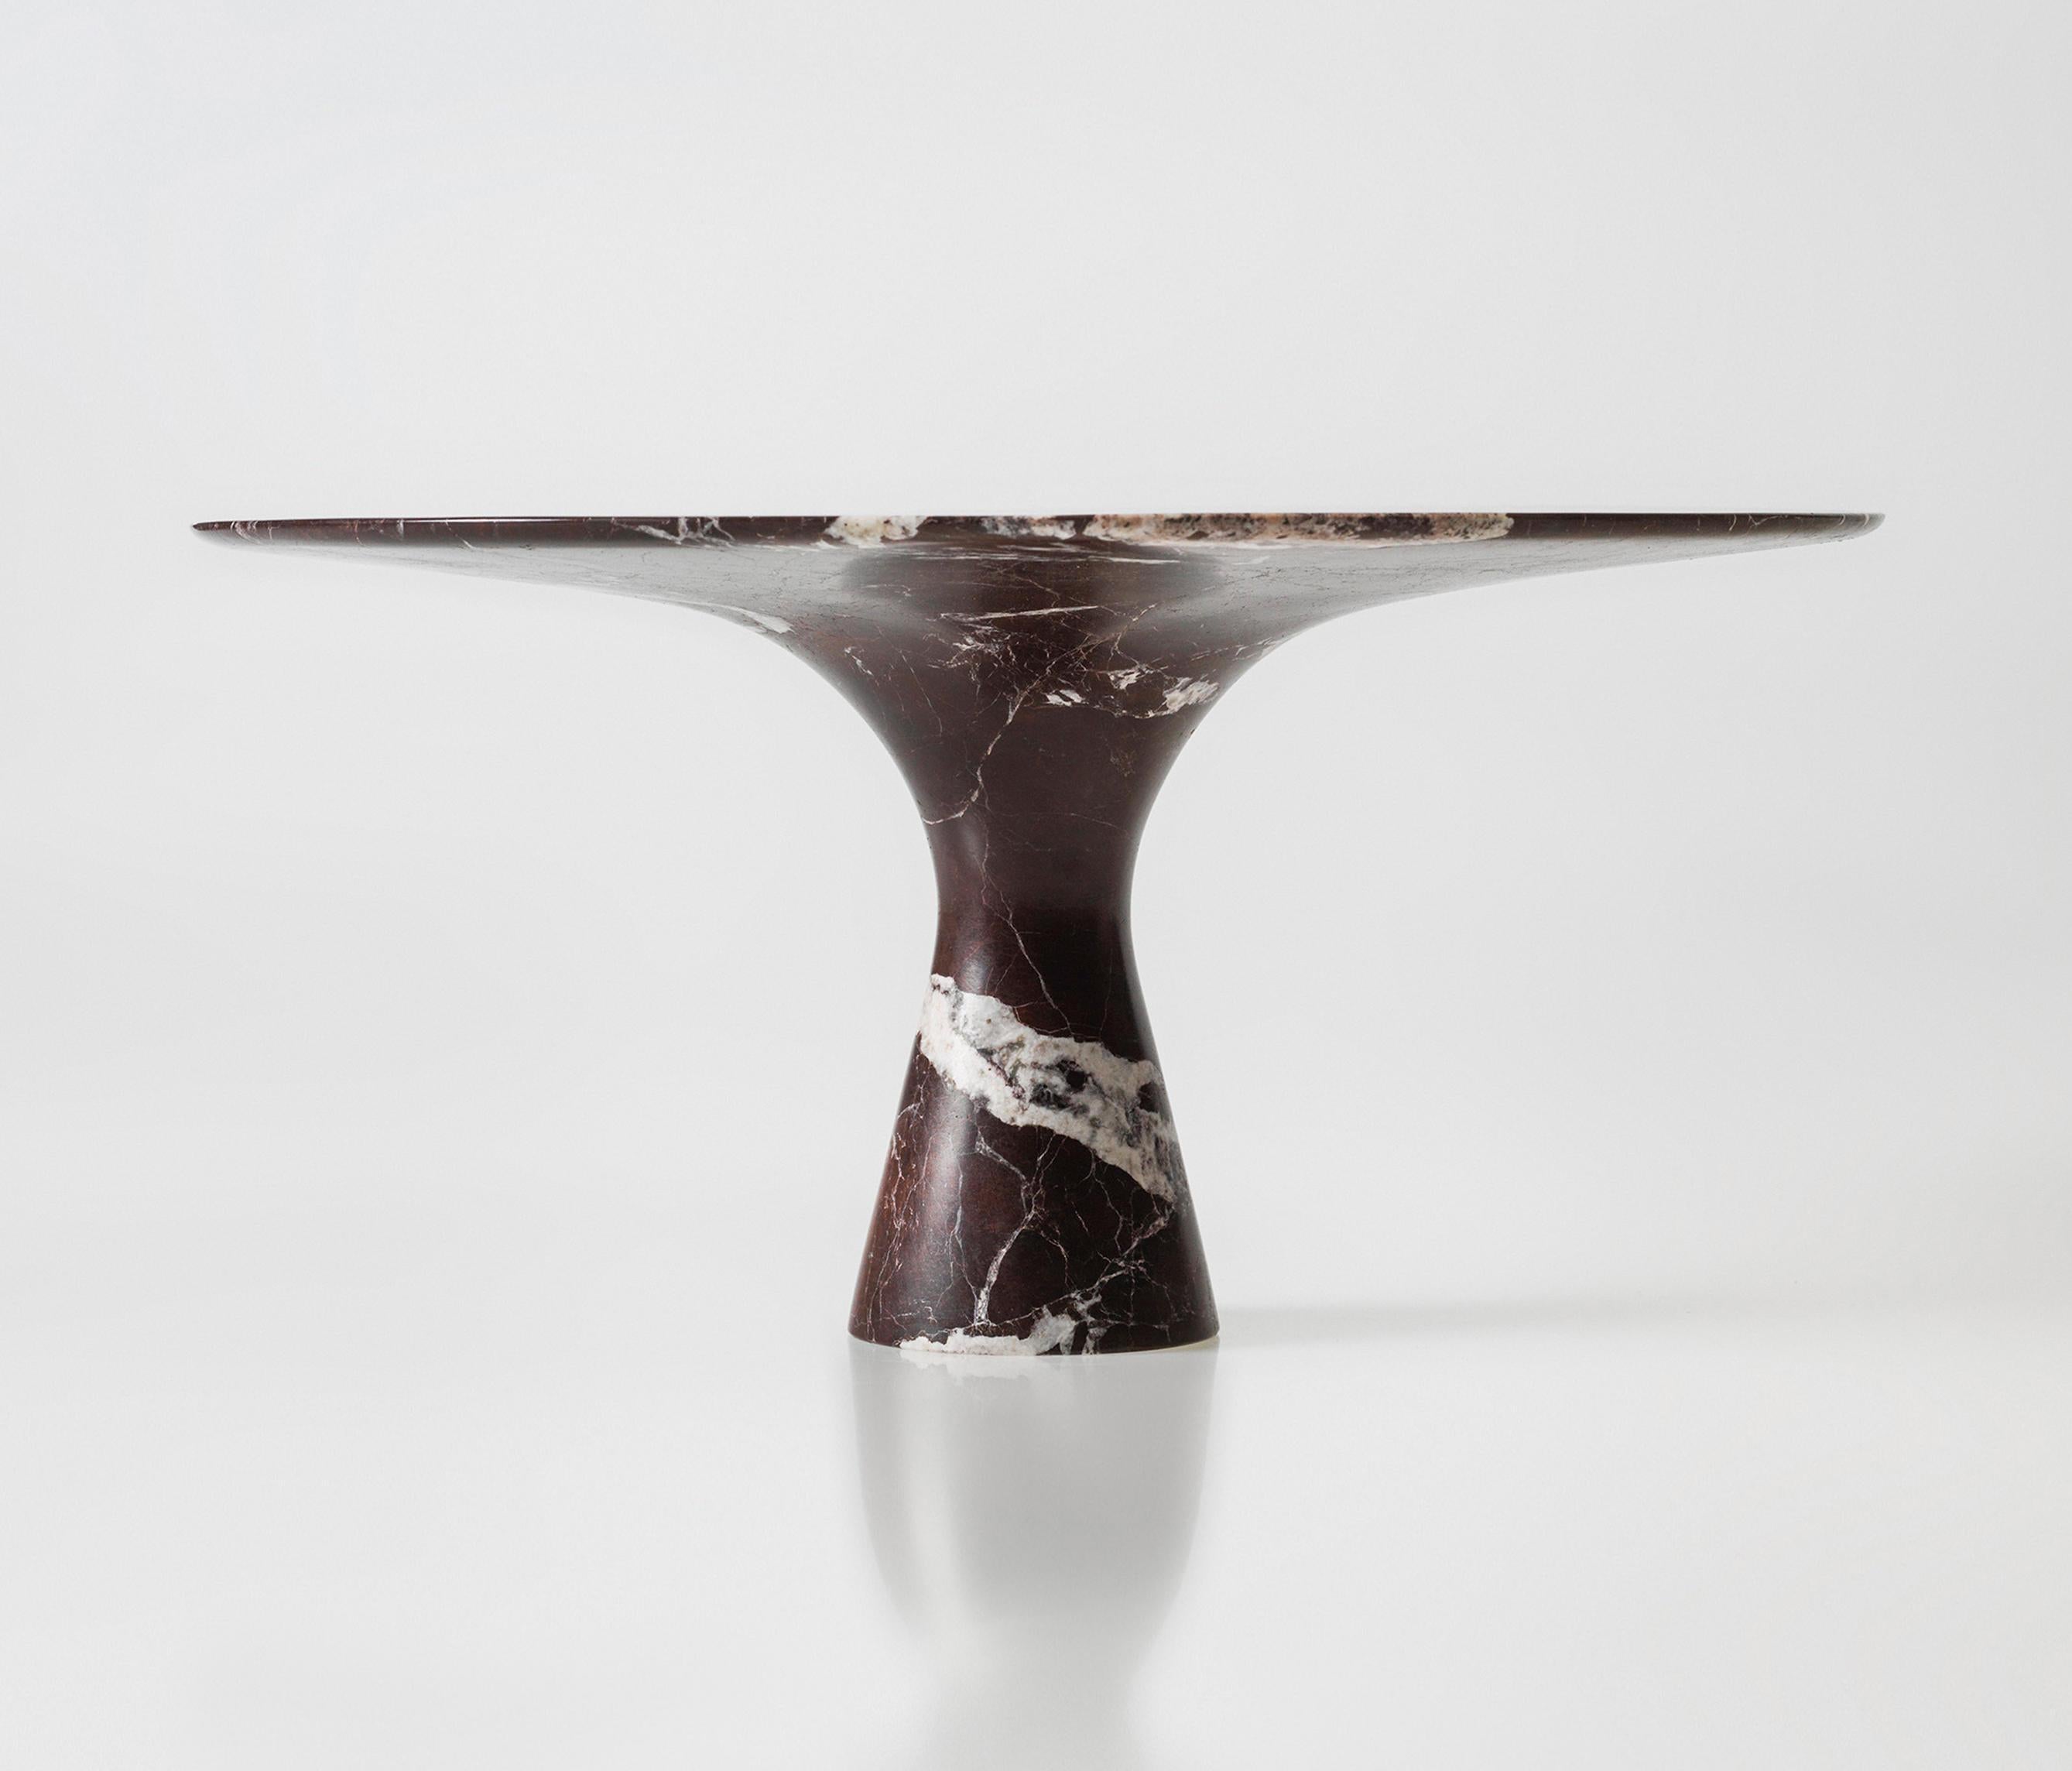 Rosso Lepanto Refined Contemporary Marble Dining Table 160 / 75
Dimensions: 160 x 75 cm
Materials: Rosso Lepanto

Angelo is the essence of a round table in natural stone, a sculptural shape in robust material with elegant lines and refined